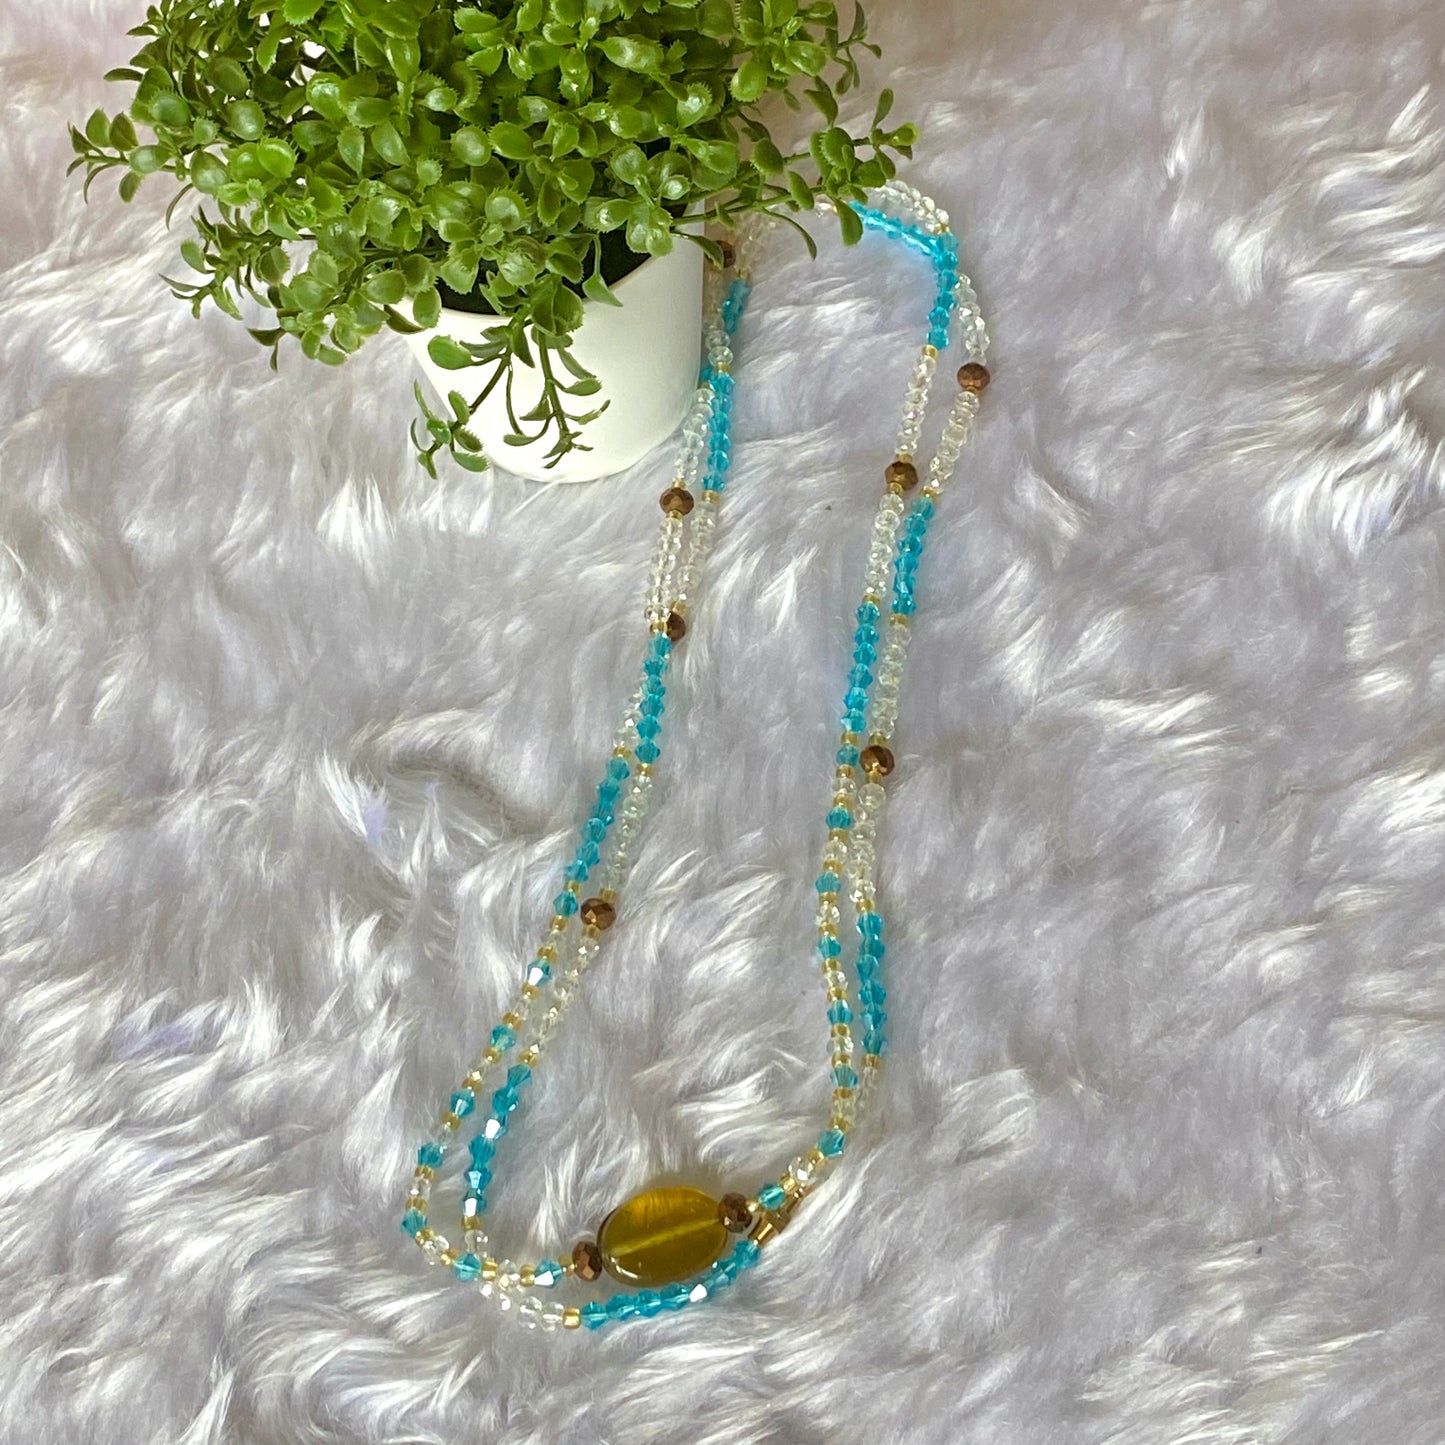 Dupe Sea Blue Crystal Belly Chain Waist Beads